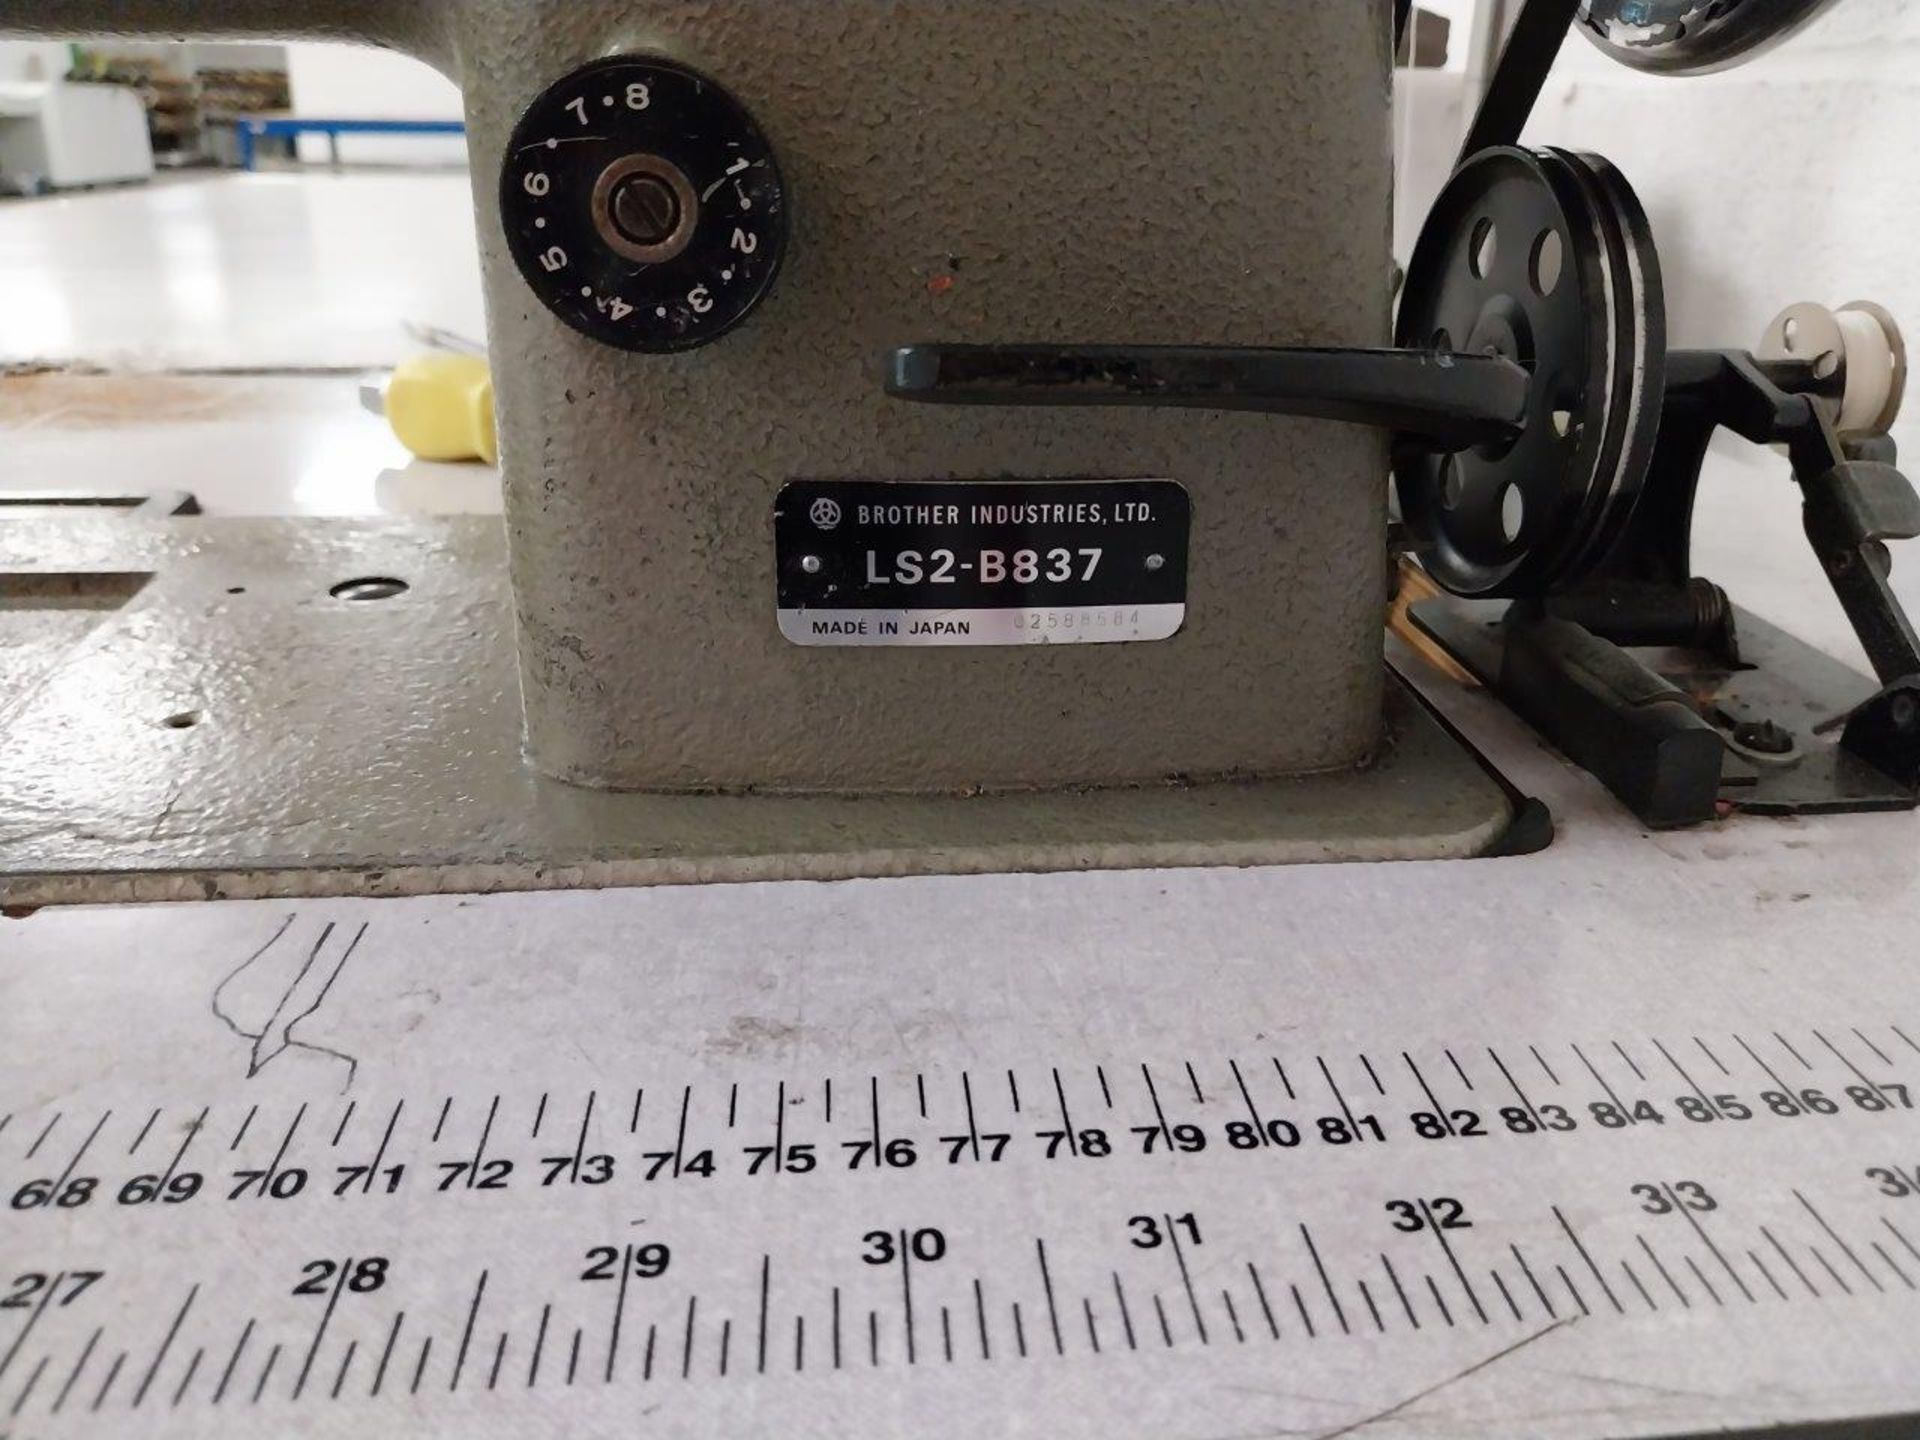 Brother LS2-B837 industrial sewing machine - Image 2 of 3